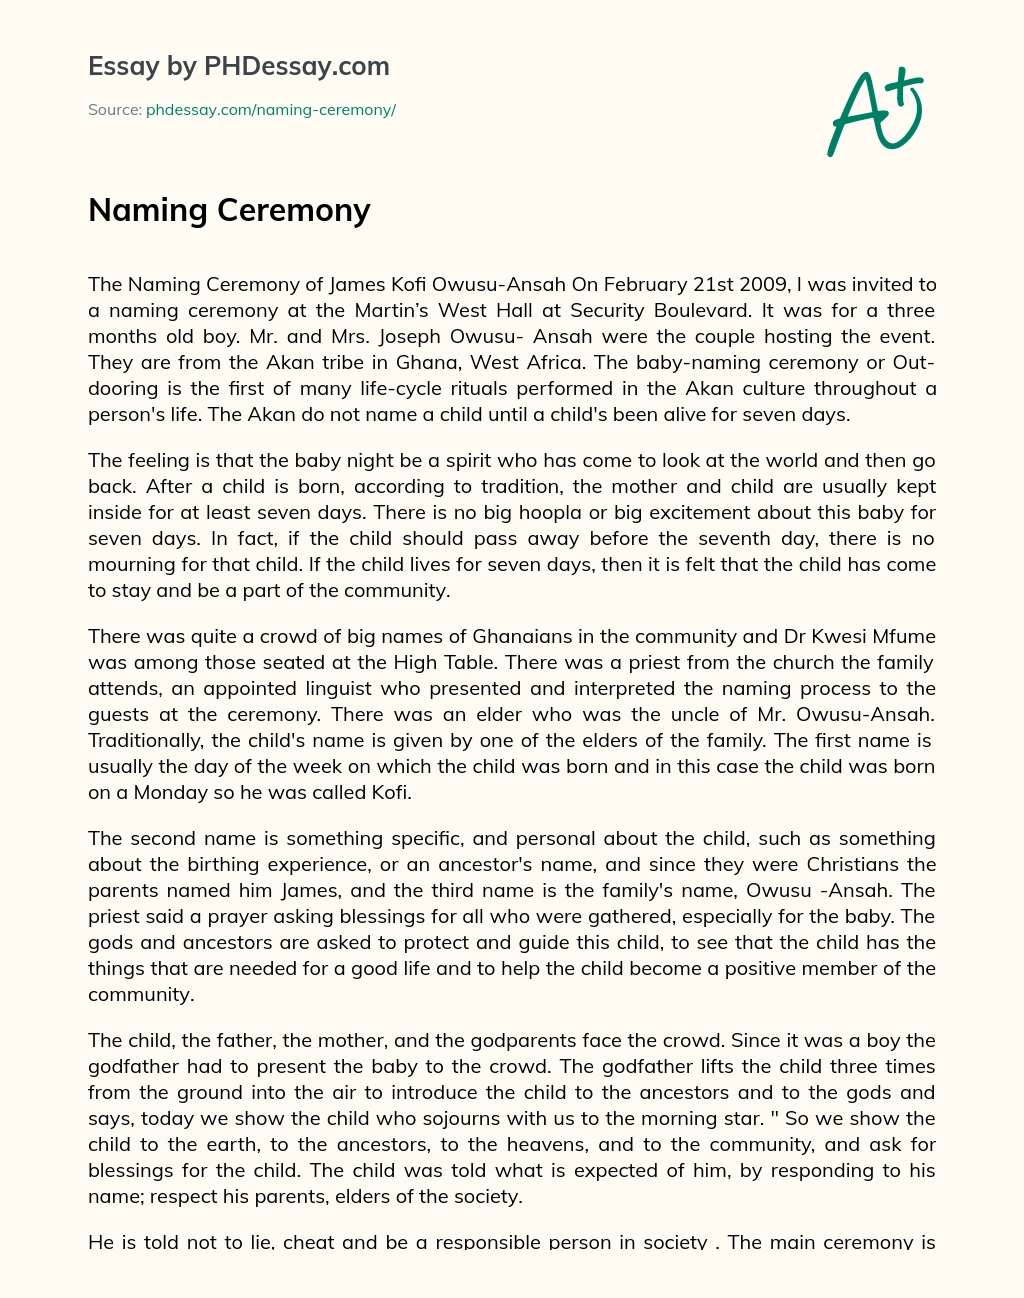 write an essay on a naming ceremony